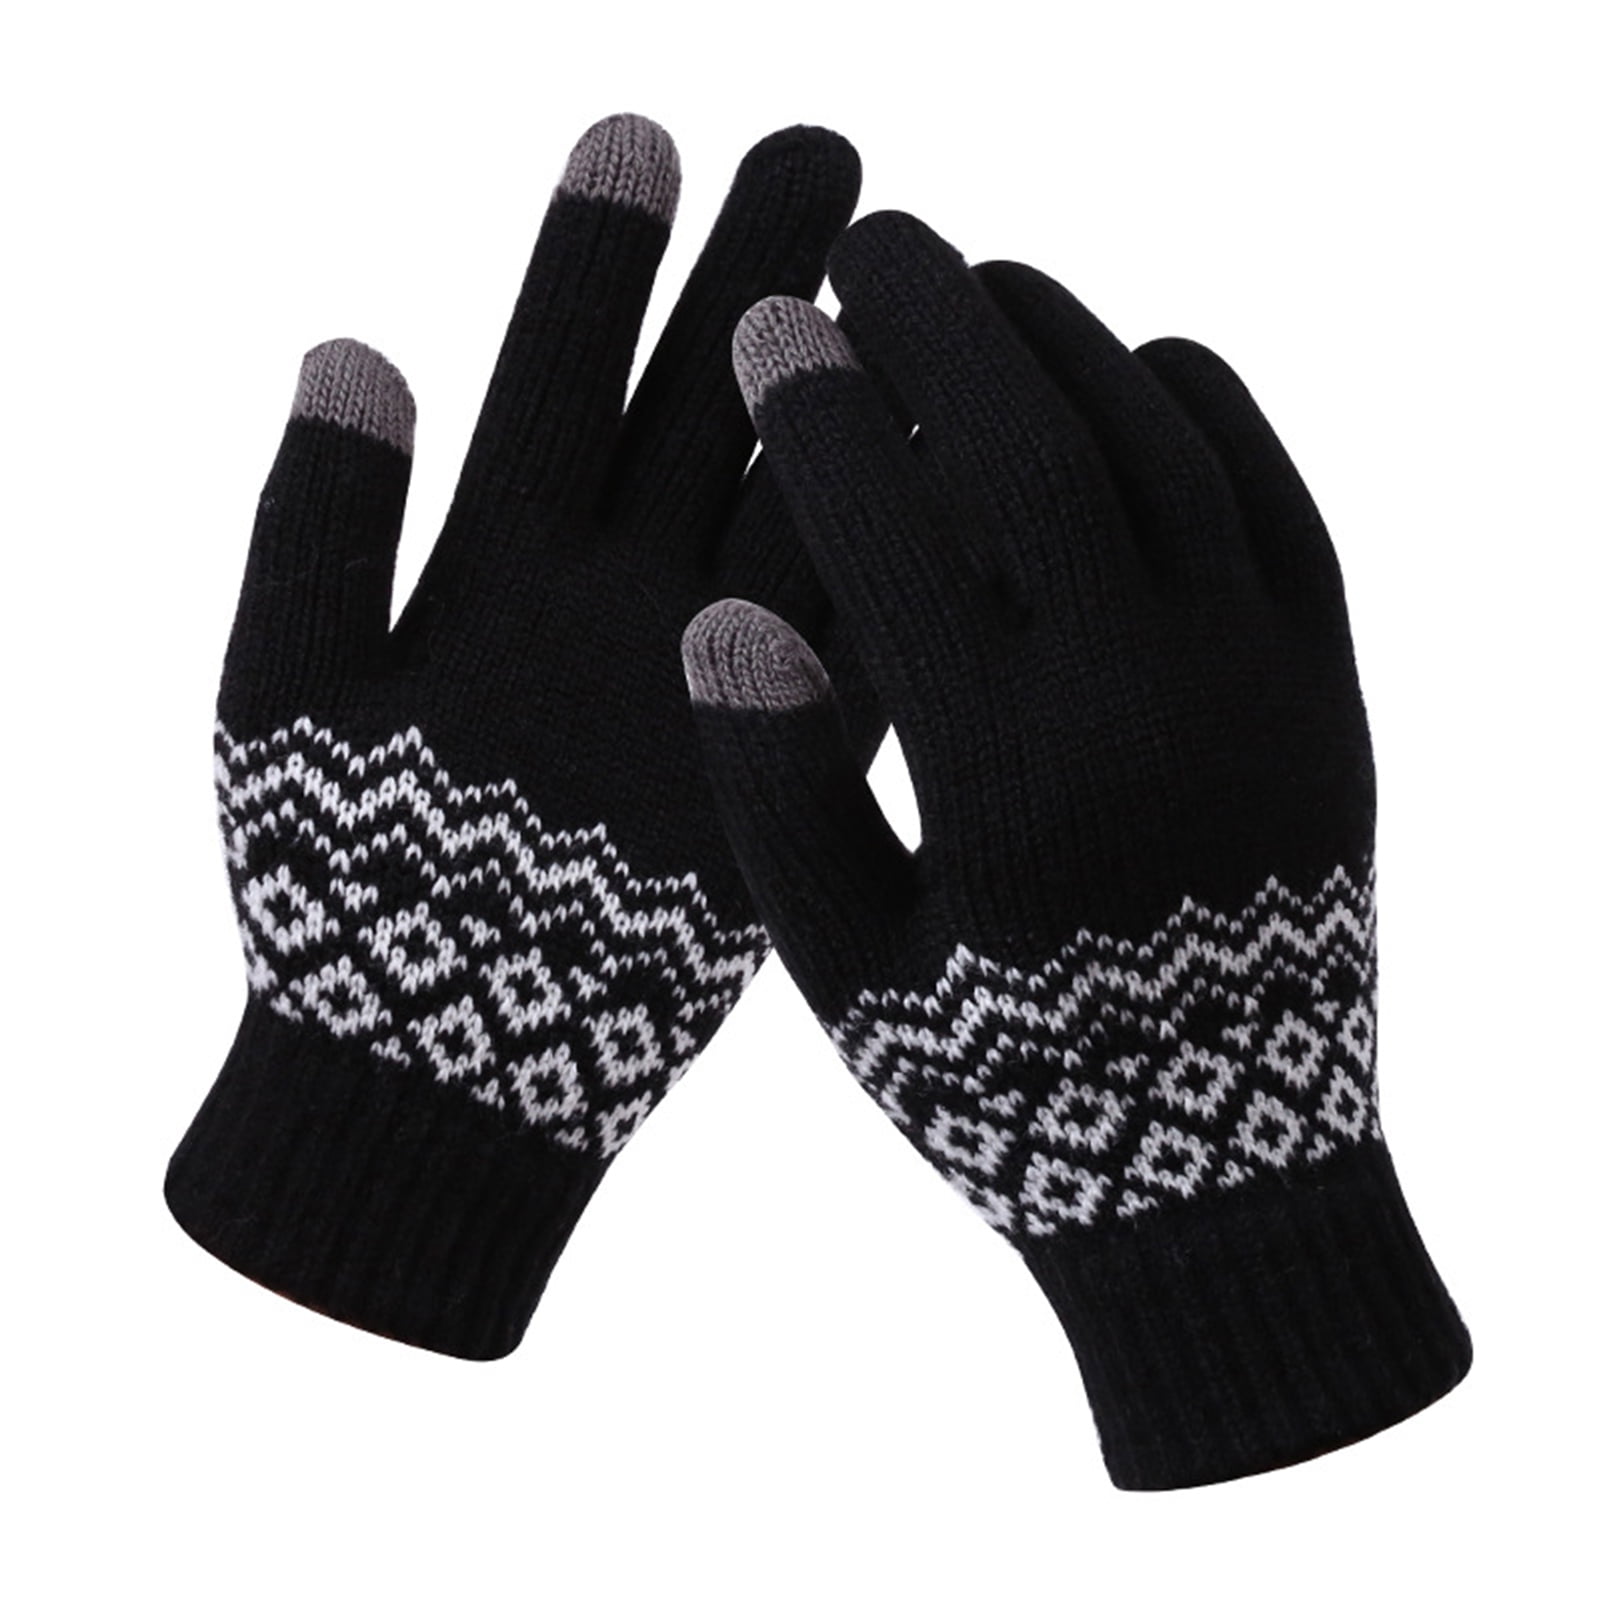 Magic Gloves Use Your Mobile While Keeping Hands Warms Black Adult Gadgets 